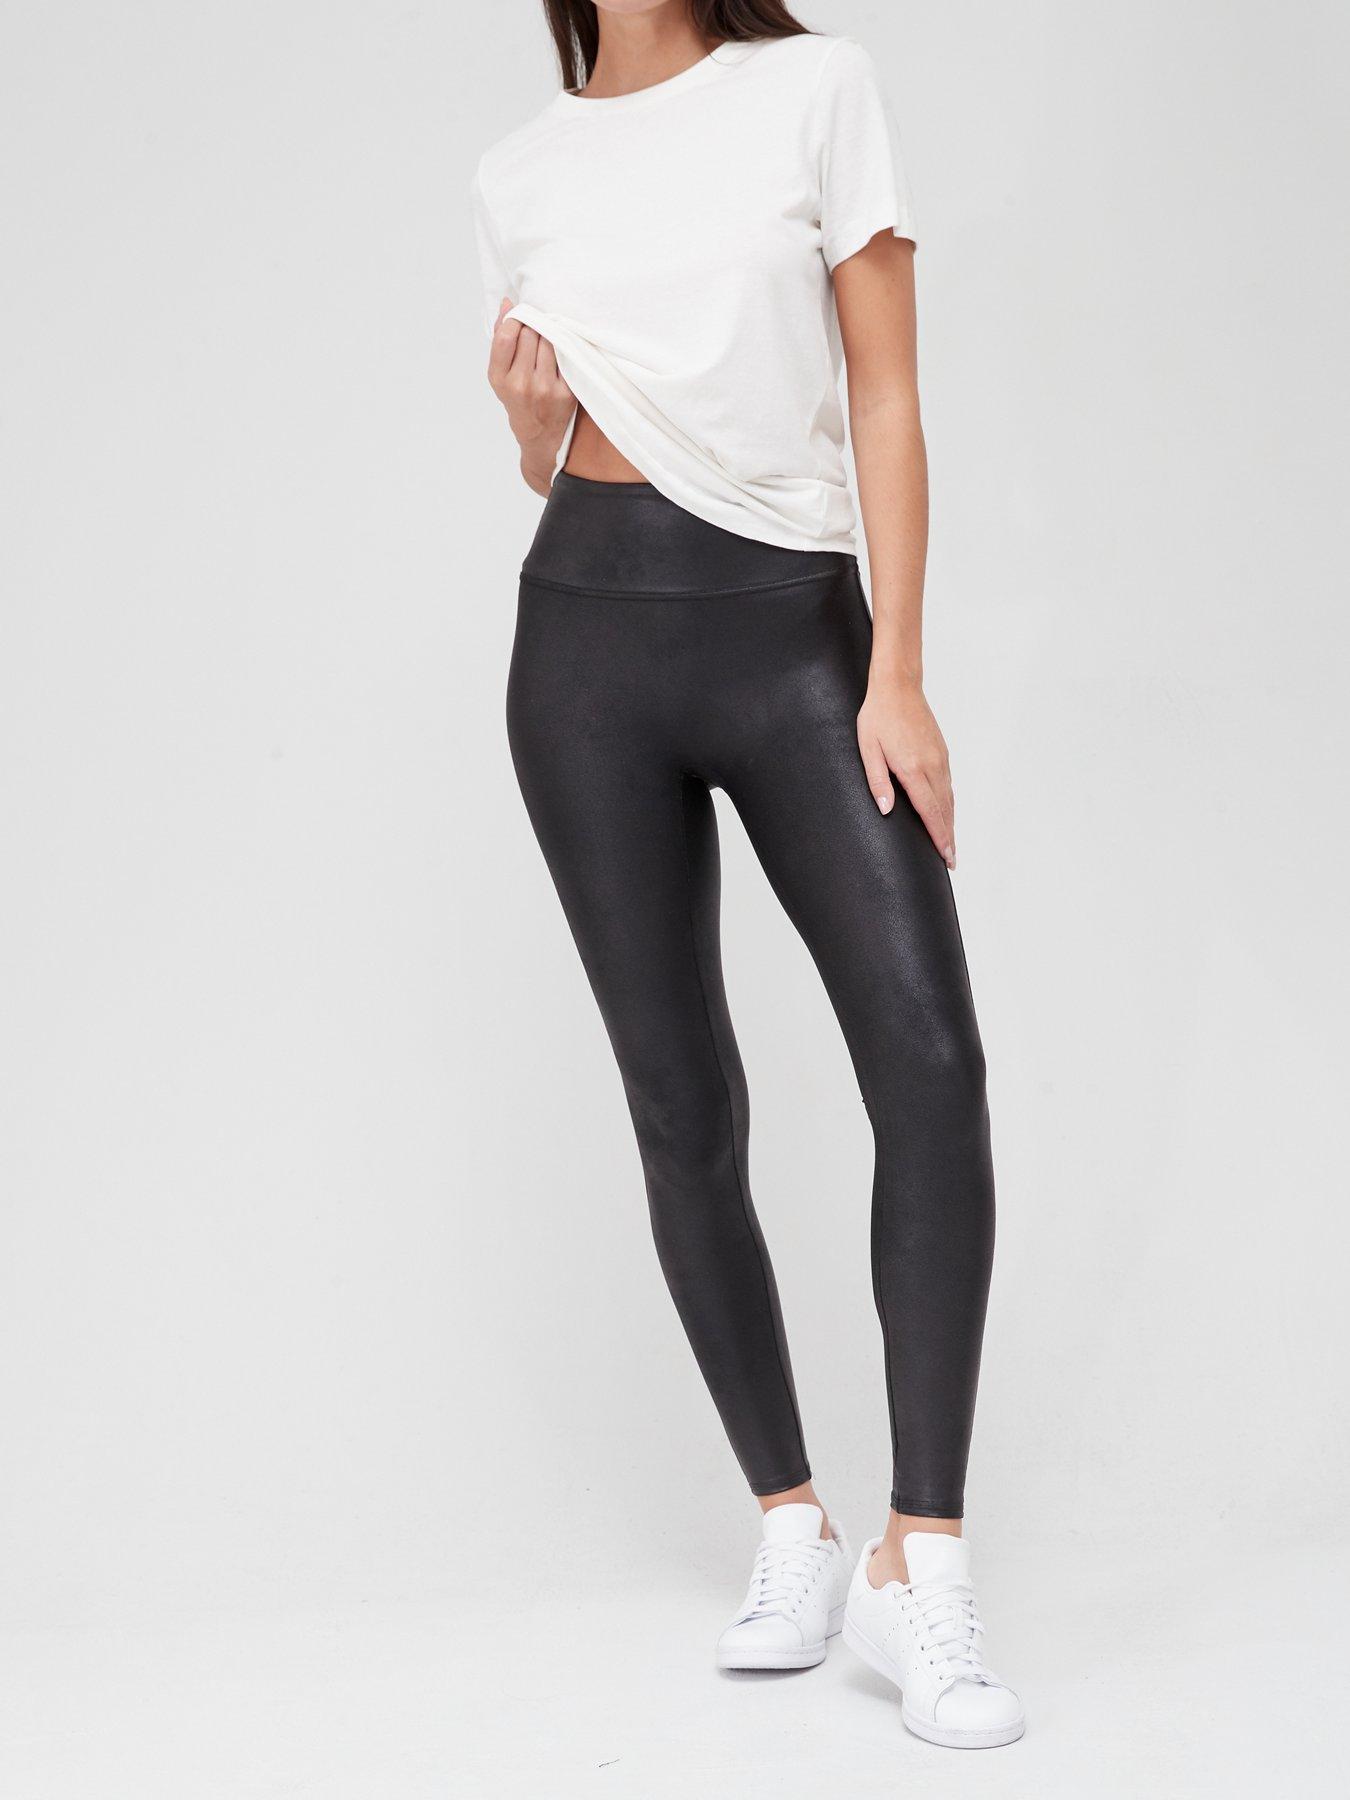 Buy SPANX® Curve Medium Control Faux Leather Shaping Leggings from